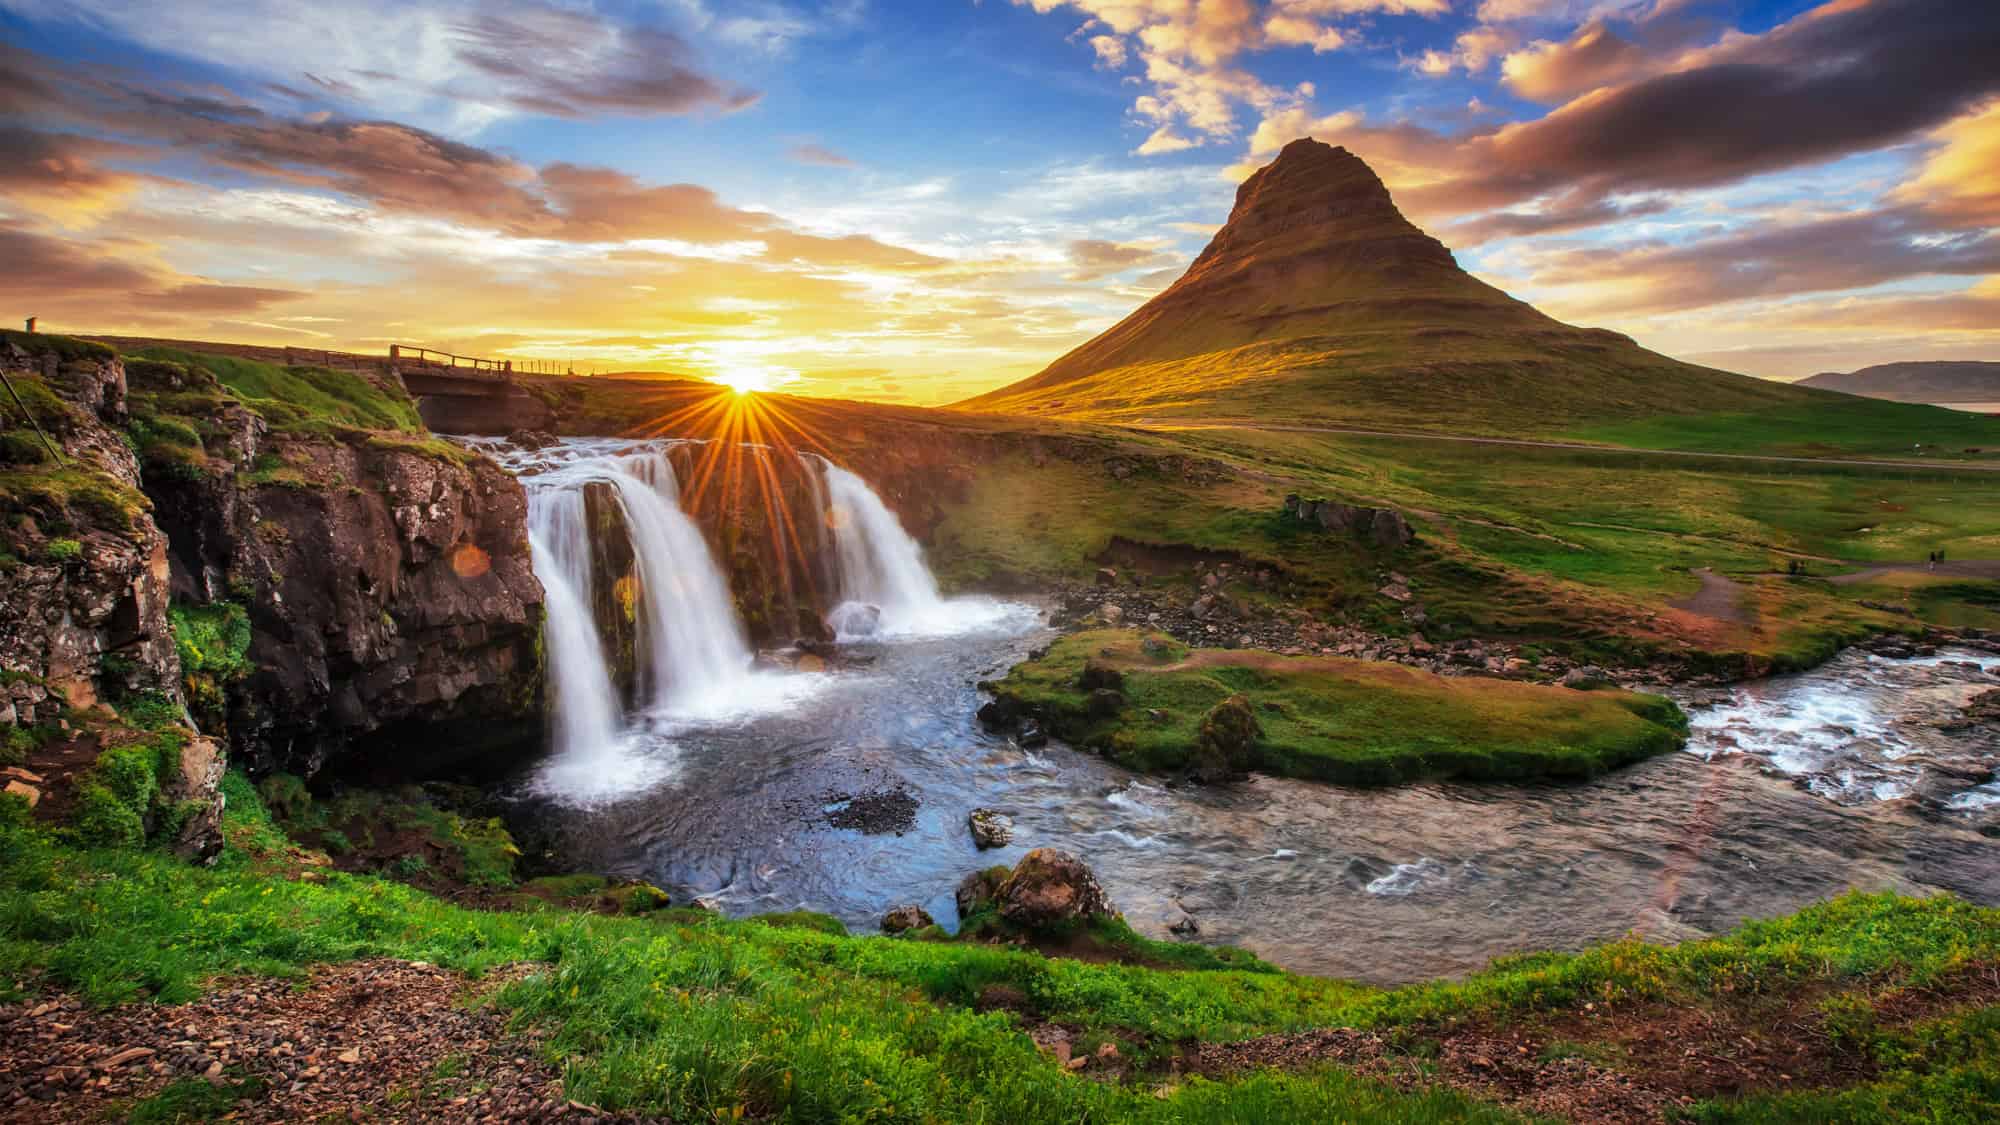 <p>Ah, Kirkjufell. You know that mountain you saw numerous times while binging “Game of Thrones?” Yep, this is it. <strong>Known as “Church Mountain,” Kirkjufell is basically Iceland’s supermodel mountain</strong>—it just can’t take a bad picture. </p> <p>Standing tall at over 1,500 feet, its distinctive shape makes it an absolute show-off in any snapshot. And if you really want to crank up the epic factor, get a shot with the nearby Kirkjufellsfoss waterfall. It’s basically like the mountain saying, “Oh, you’re taking my picture? Let me give you my best angle.”</p> <div class="wp-block-kadence-iconlist kt-svg-icon-list-items kt-svg-icon-list-items4232_e171c6-fe kt-svg-icon-list-columns-1 alignnone"> <ul class="kt-svg-icon-list"> <li class="wp-block-kadence-listitem kt-svg-icon-list-item-wrap kt-svg-icon-list-item-4232_85bc3b-d8"><span><strong>Best time to visit</strong>: Sunset, when the sky lights up in colors that would make Monet weep.</span></li> </ul> </div>